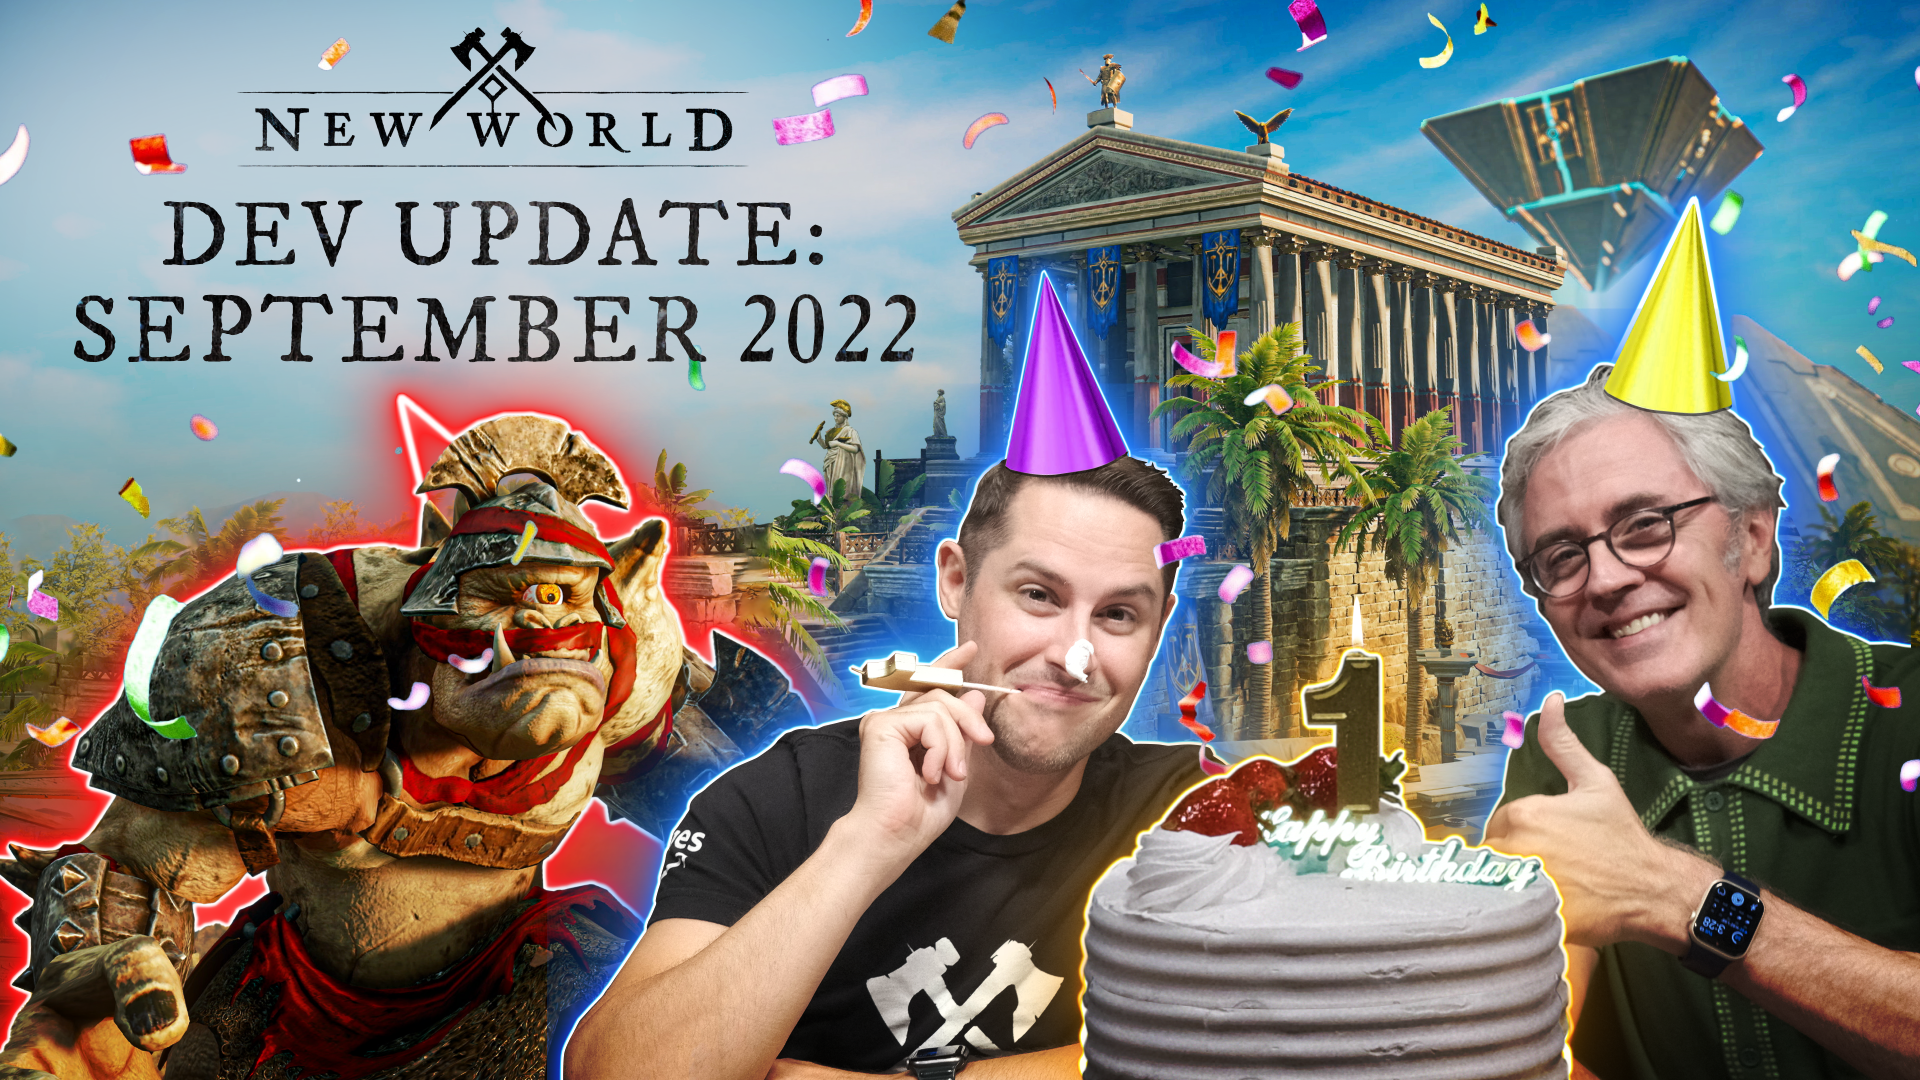 THE NEW 🎉BIRTHDAY UPDATE IS HERE! (NEW MAPS, NEW GAME, NEW